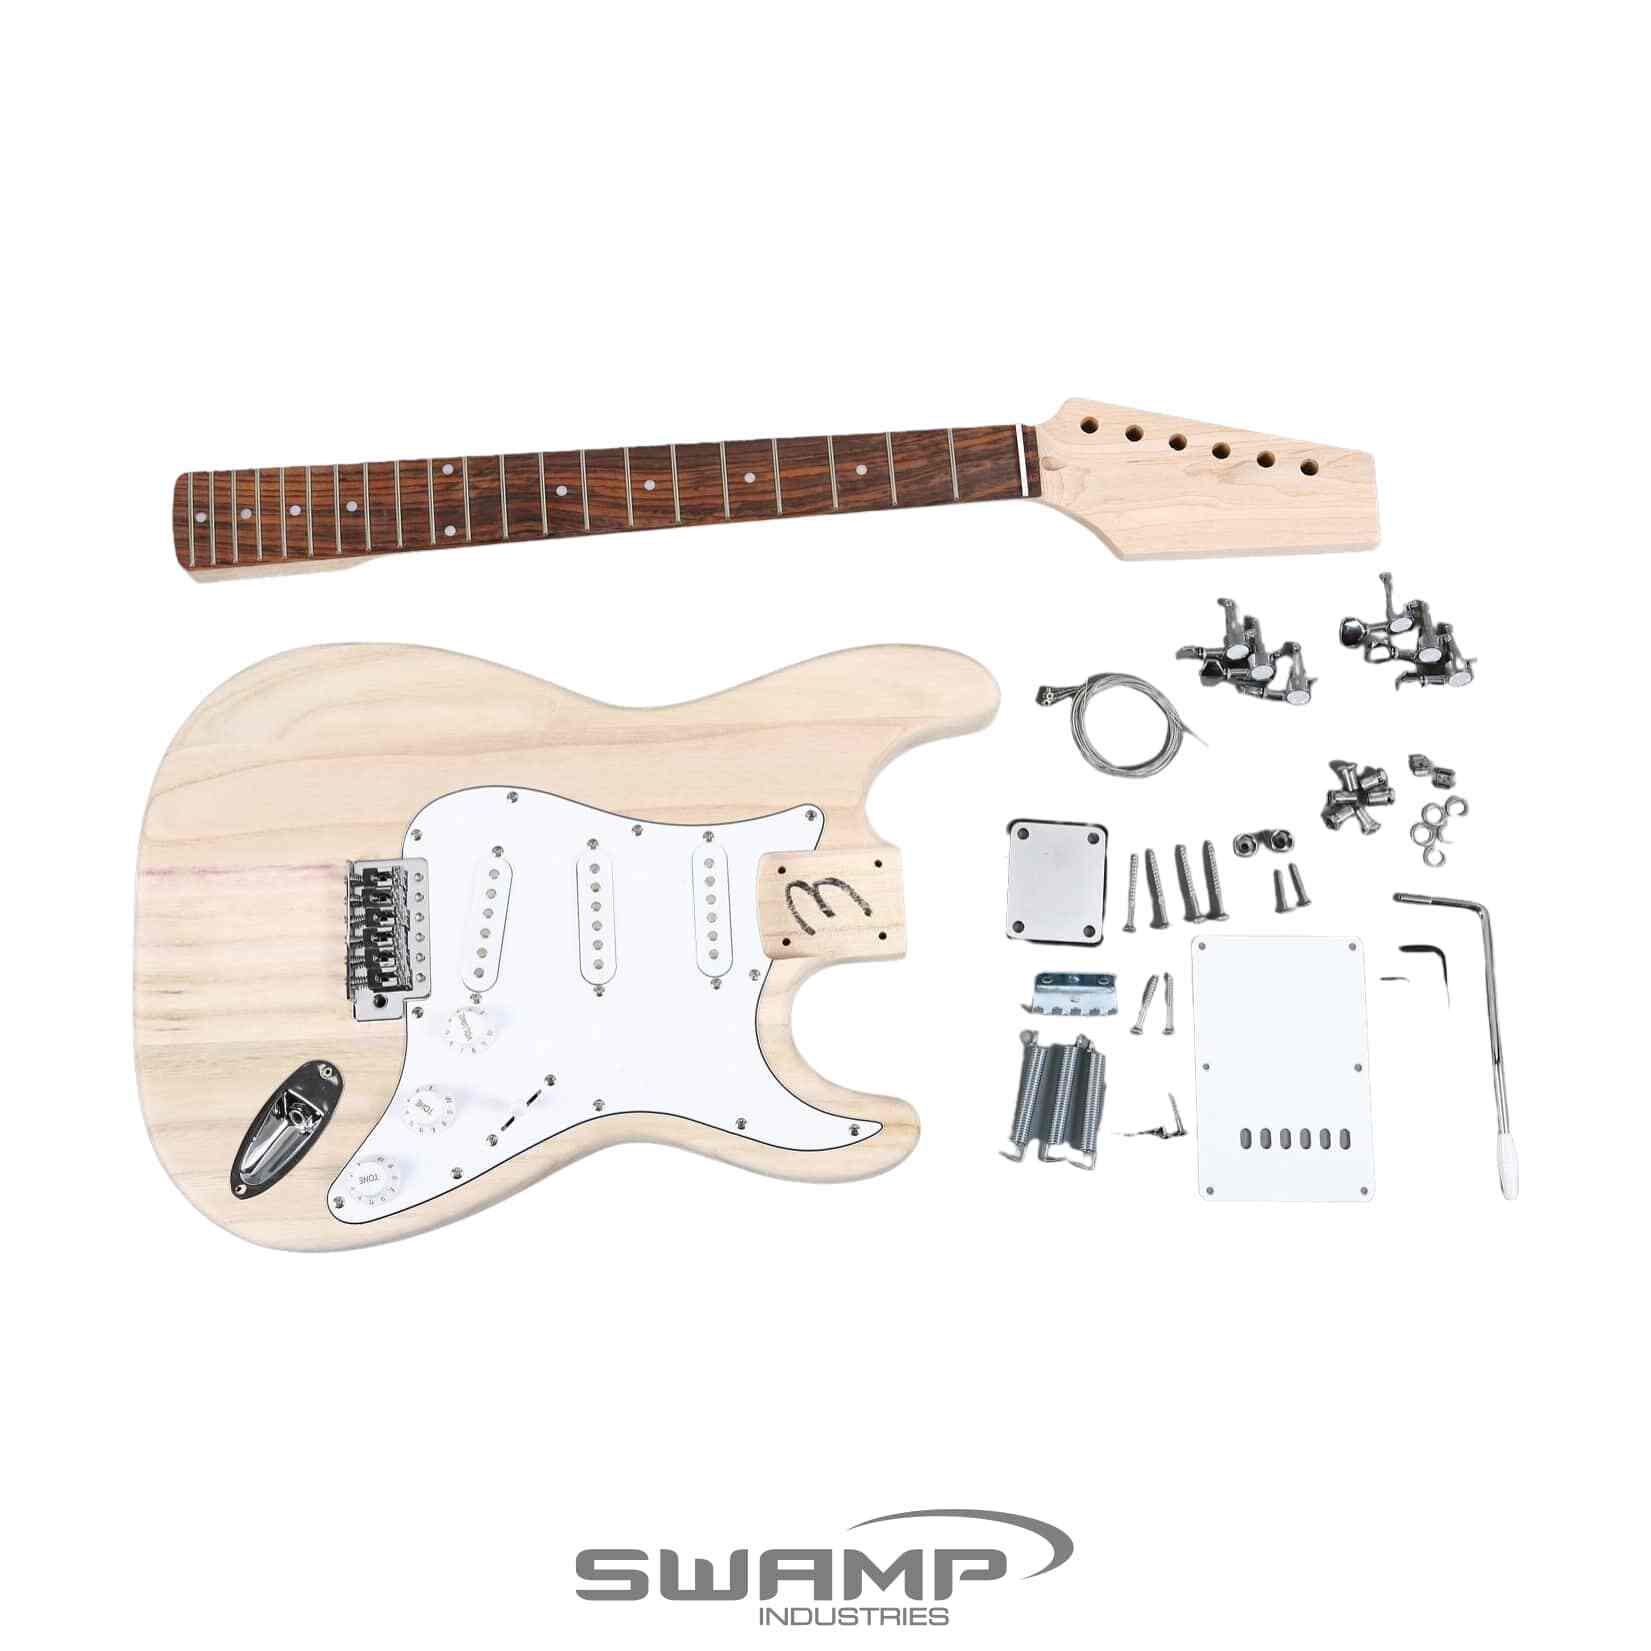 SWAMP DIY Build Your Own Electric Guitar Kit - Semi-Hollow Body 335 Style 